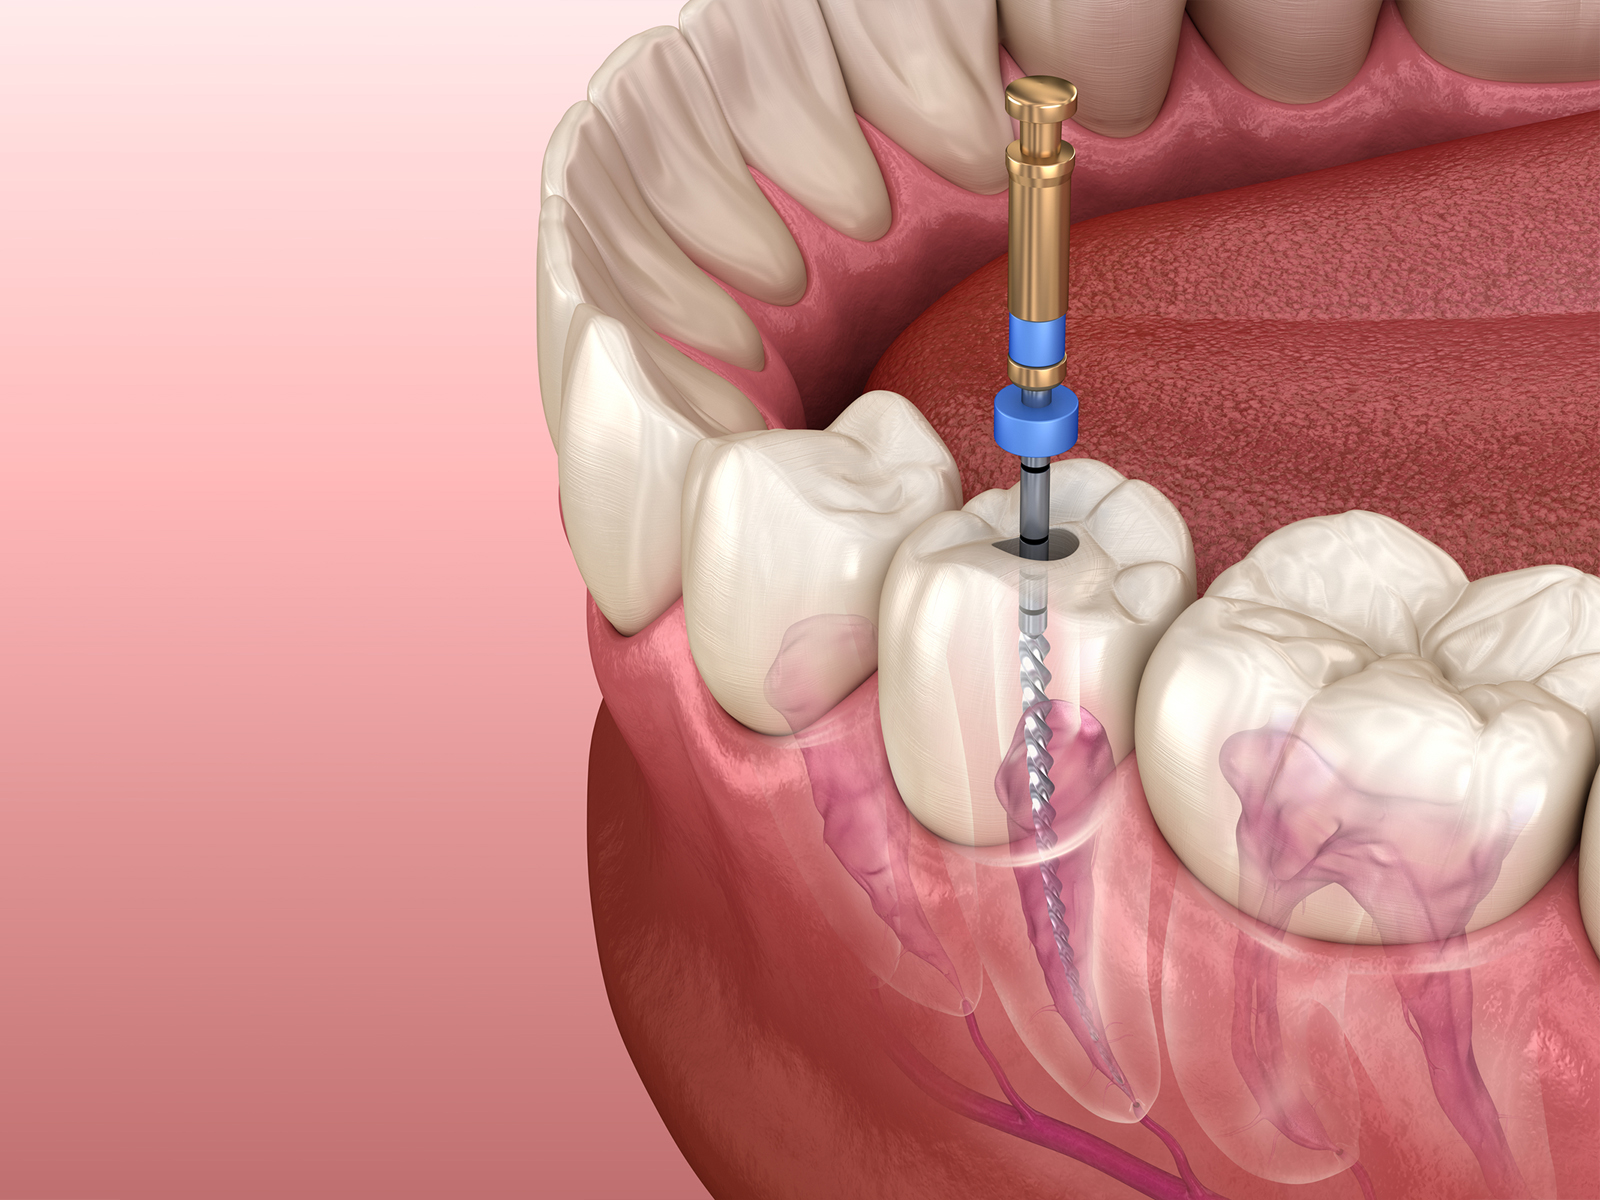 Can a Root Canal be Done More Than Once on the Same Tooth?